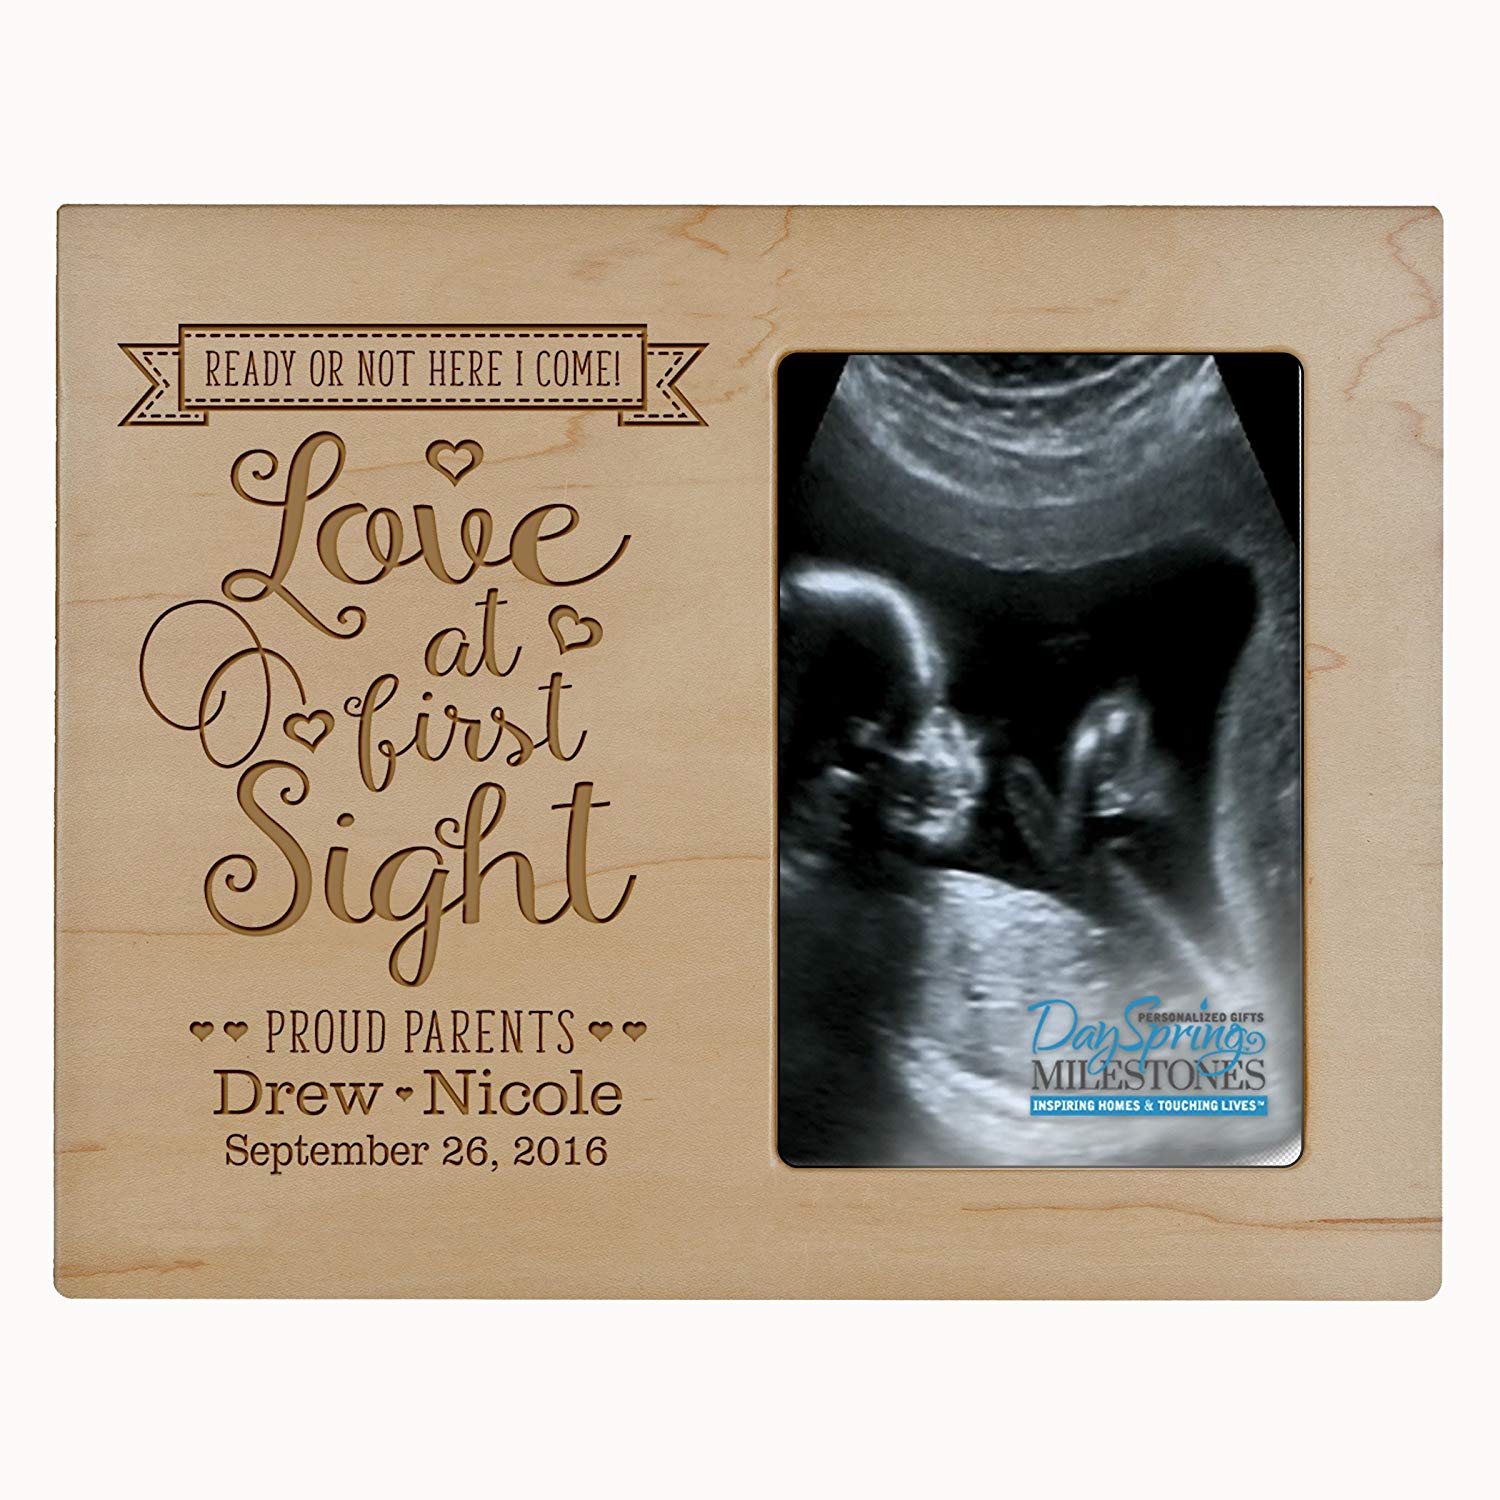 Personalized New Baby Sonogram Photo Frames - Love At First Sight - LifeSong Milestones